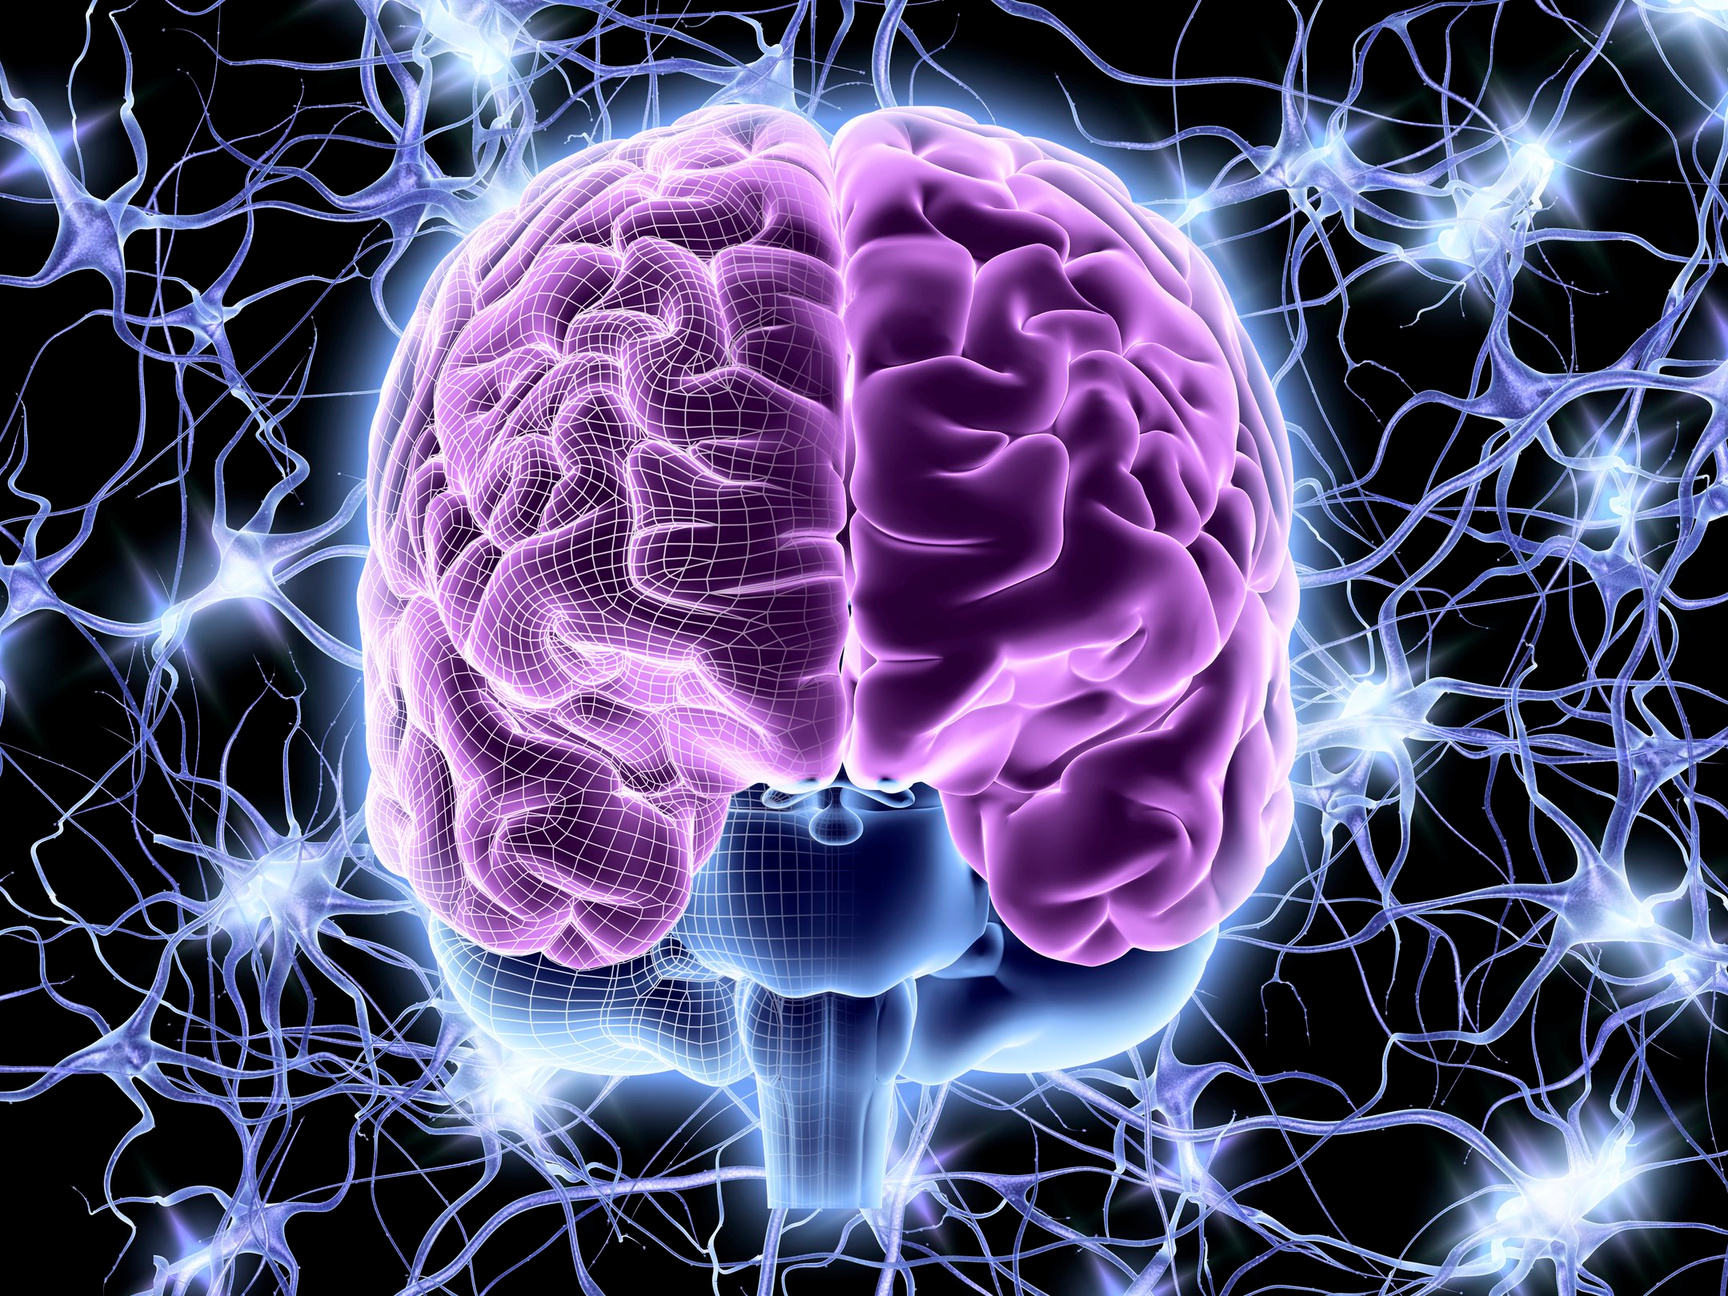 Computer artwork of a frontal view of a human brain. In the background a neural network of nerve cells firing.